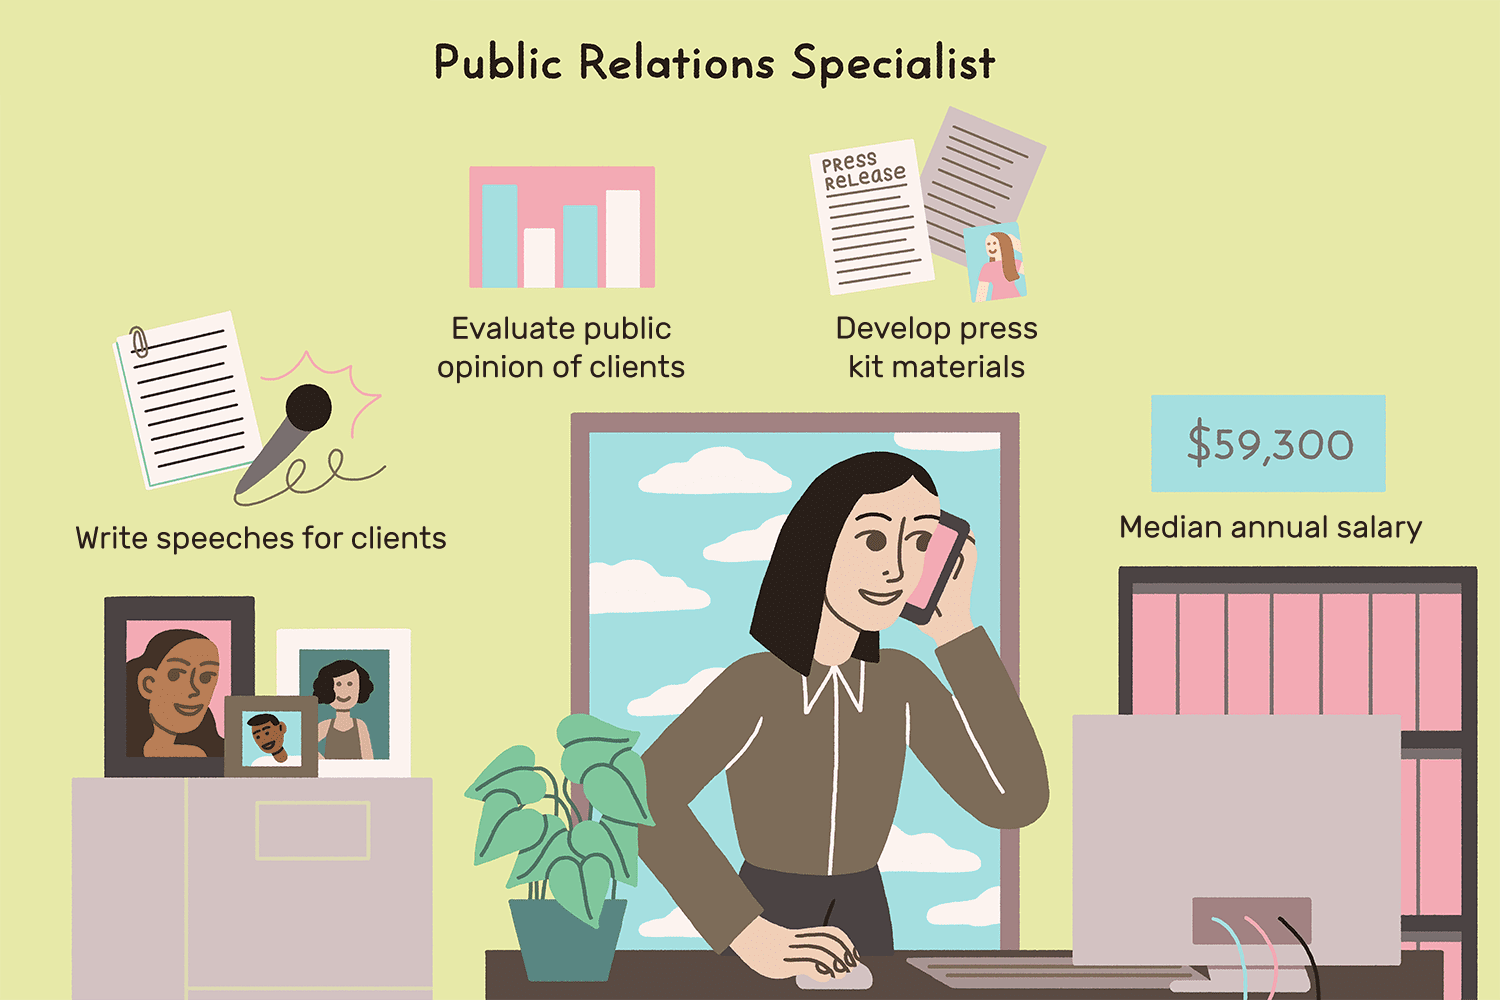 What Is One Thing A Public Relations Specialist Do?